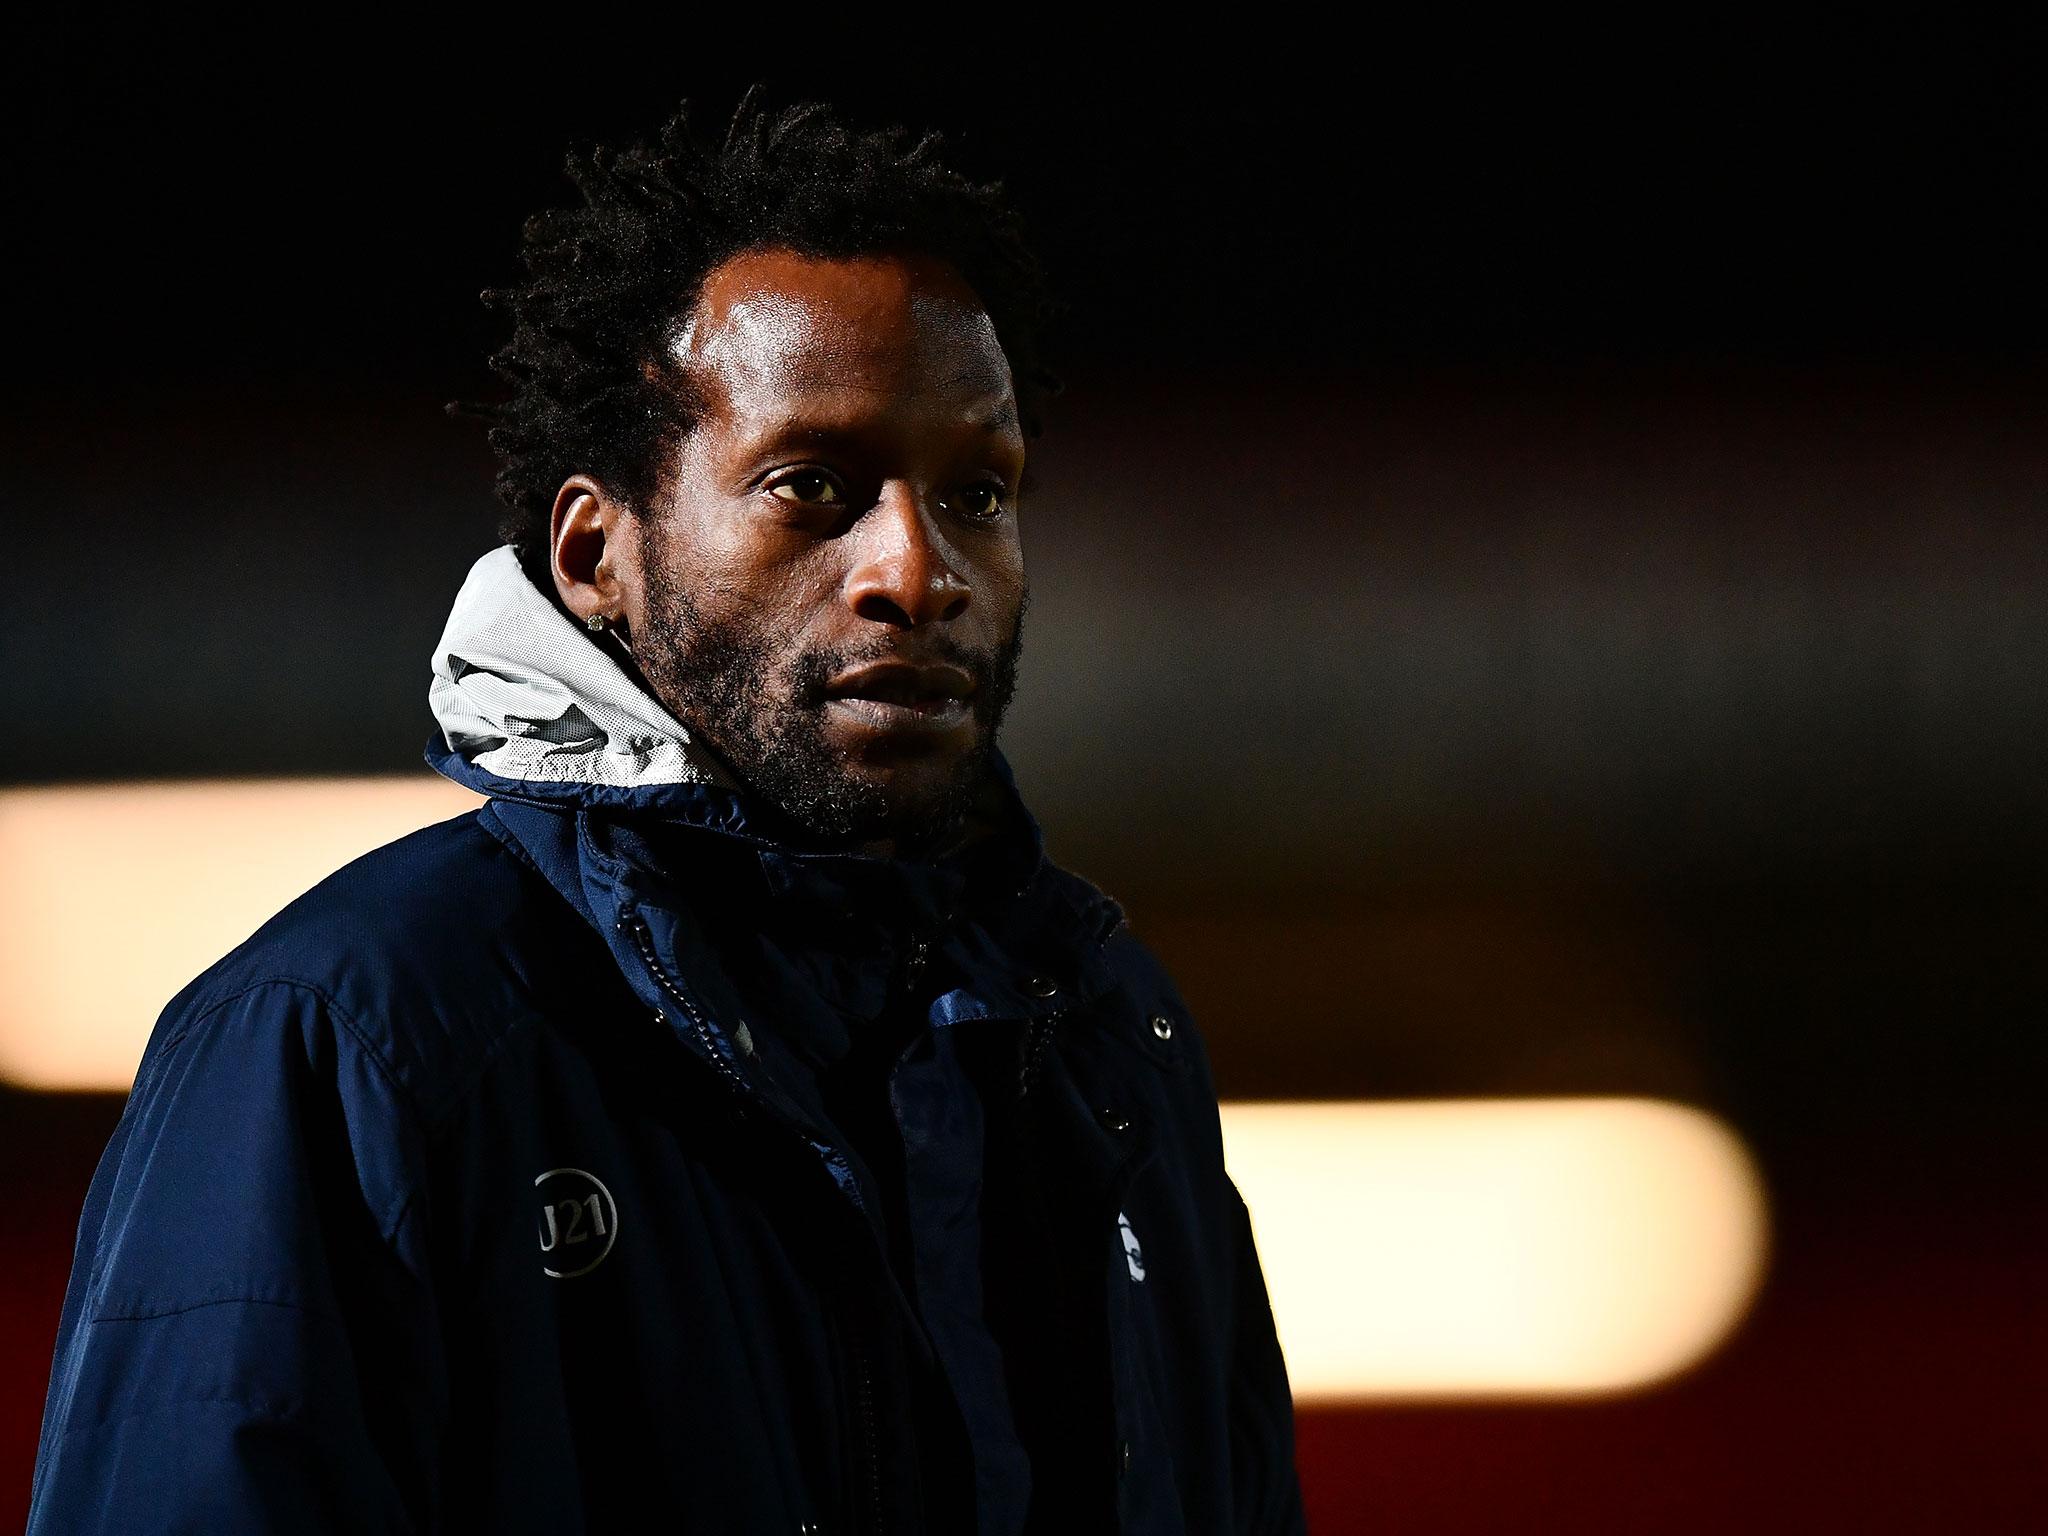 The gambling firm briefly advertised odds of 66/1 on Ugo Ehiogu